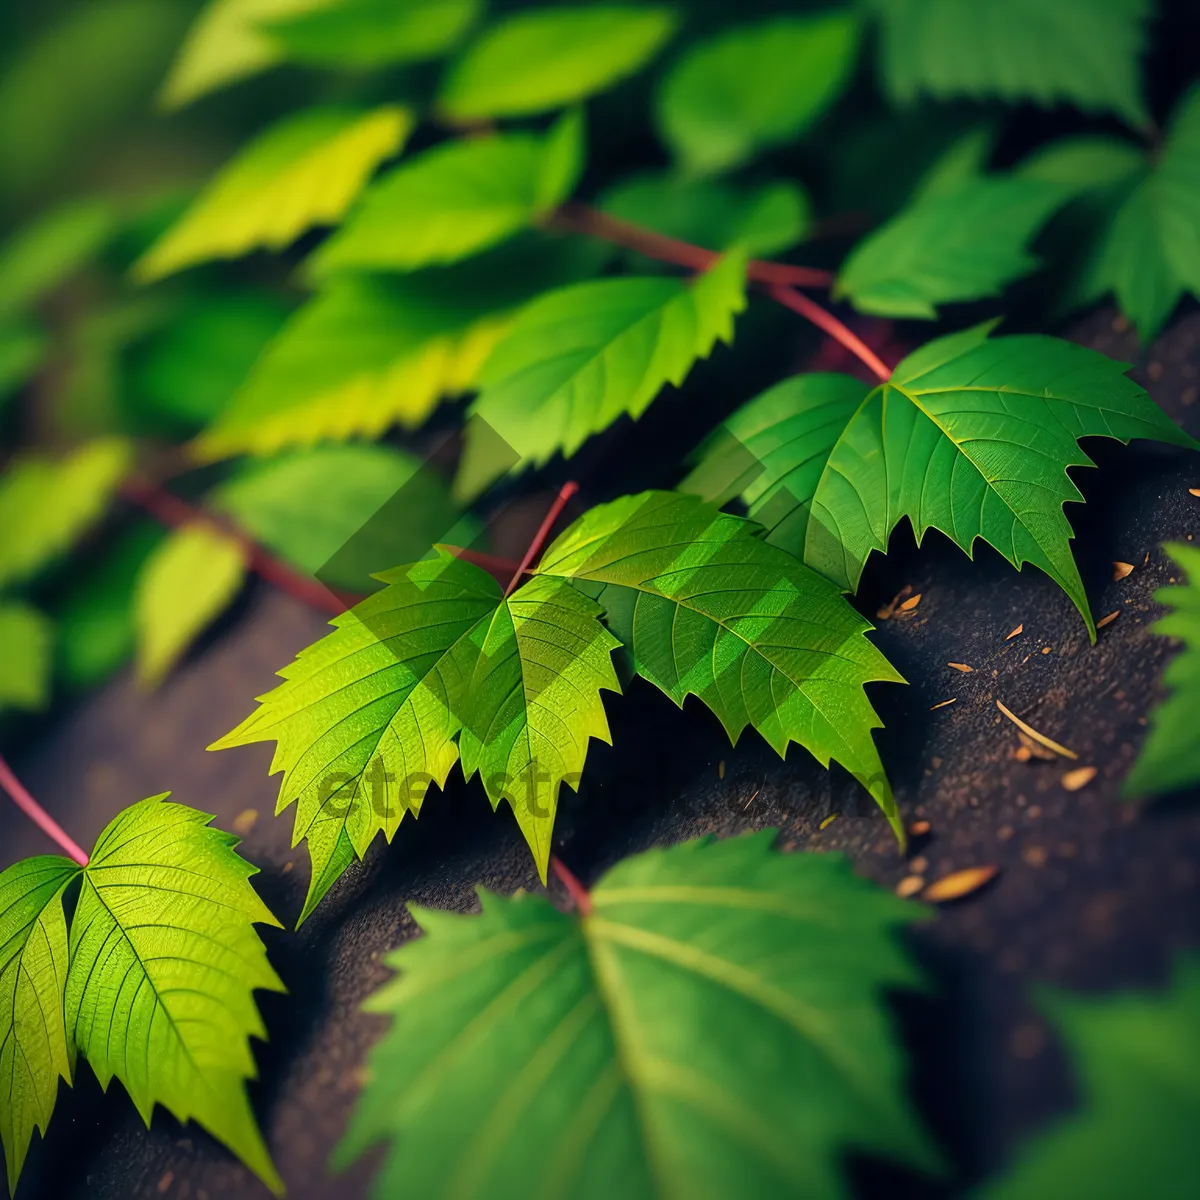 Picture of Lush Sumac Tree Leaves in Bright Forest